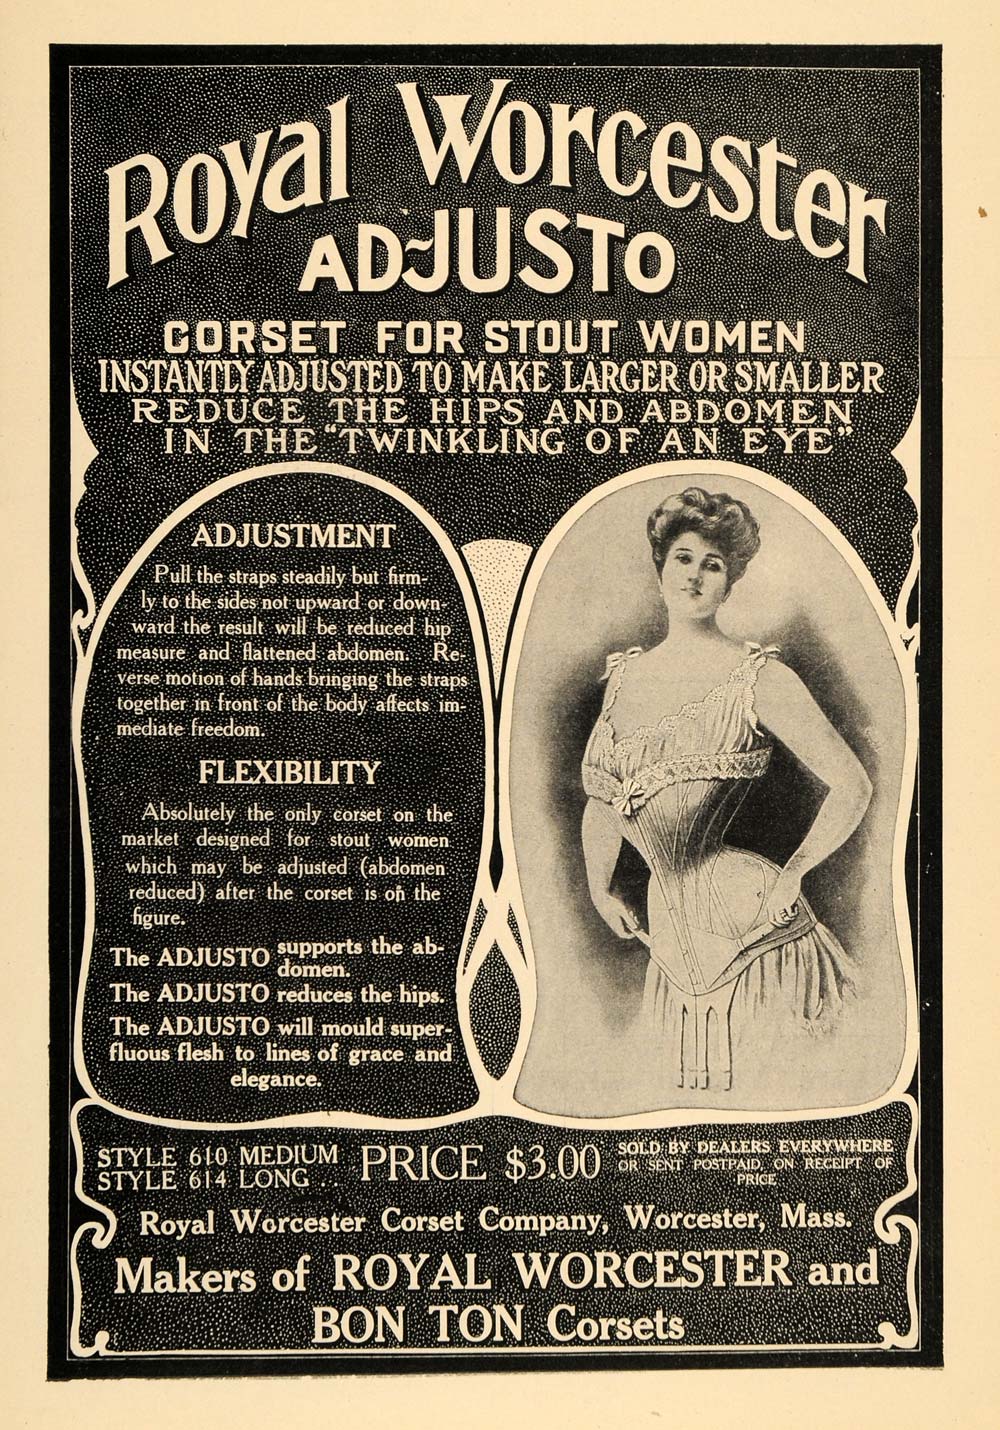 1907 Ad Royal Worcester Corset Ad-Justo For Stout Women - ORIGINAL TIN1